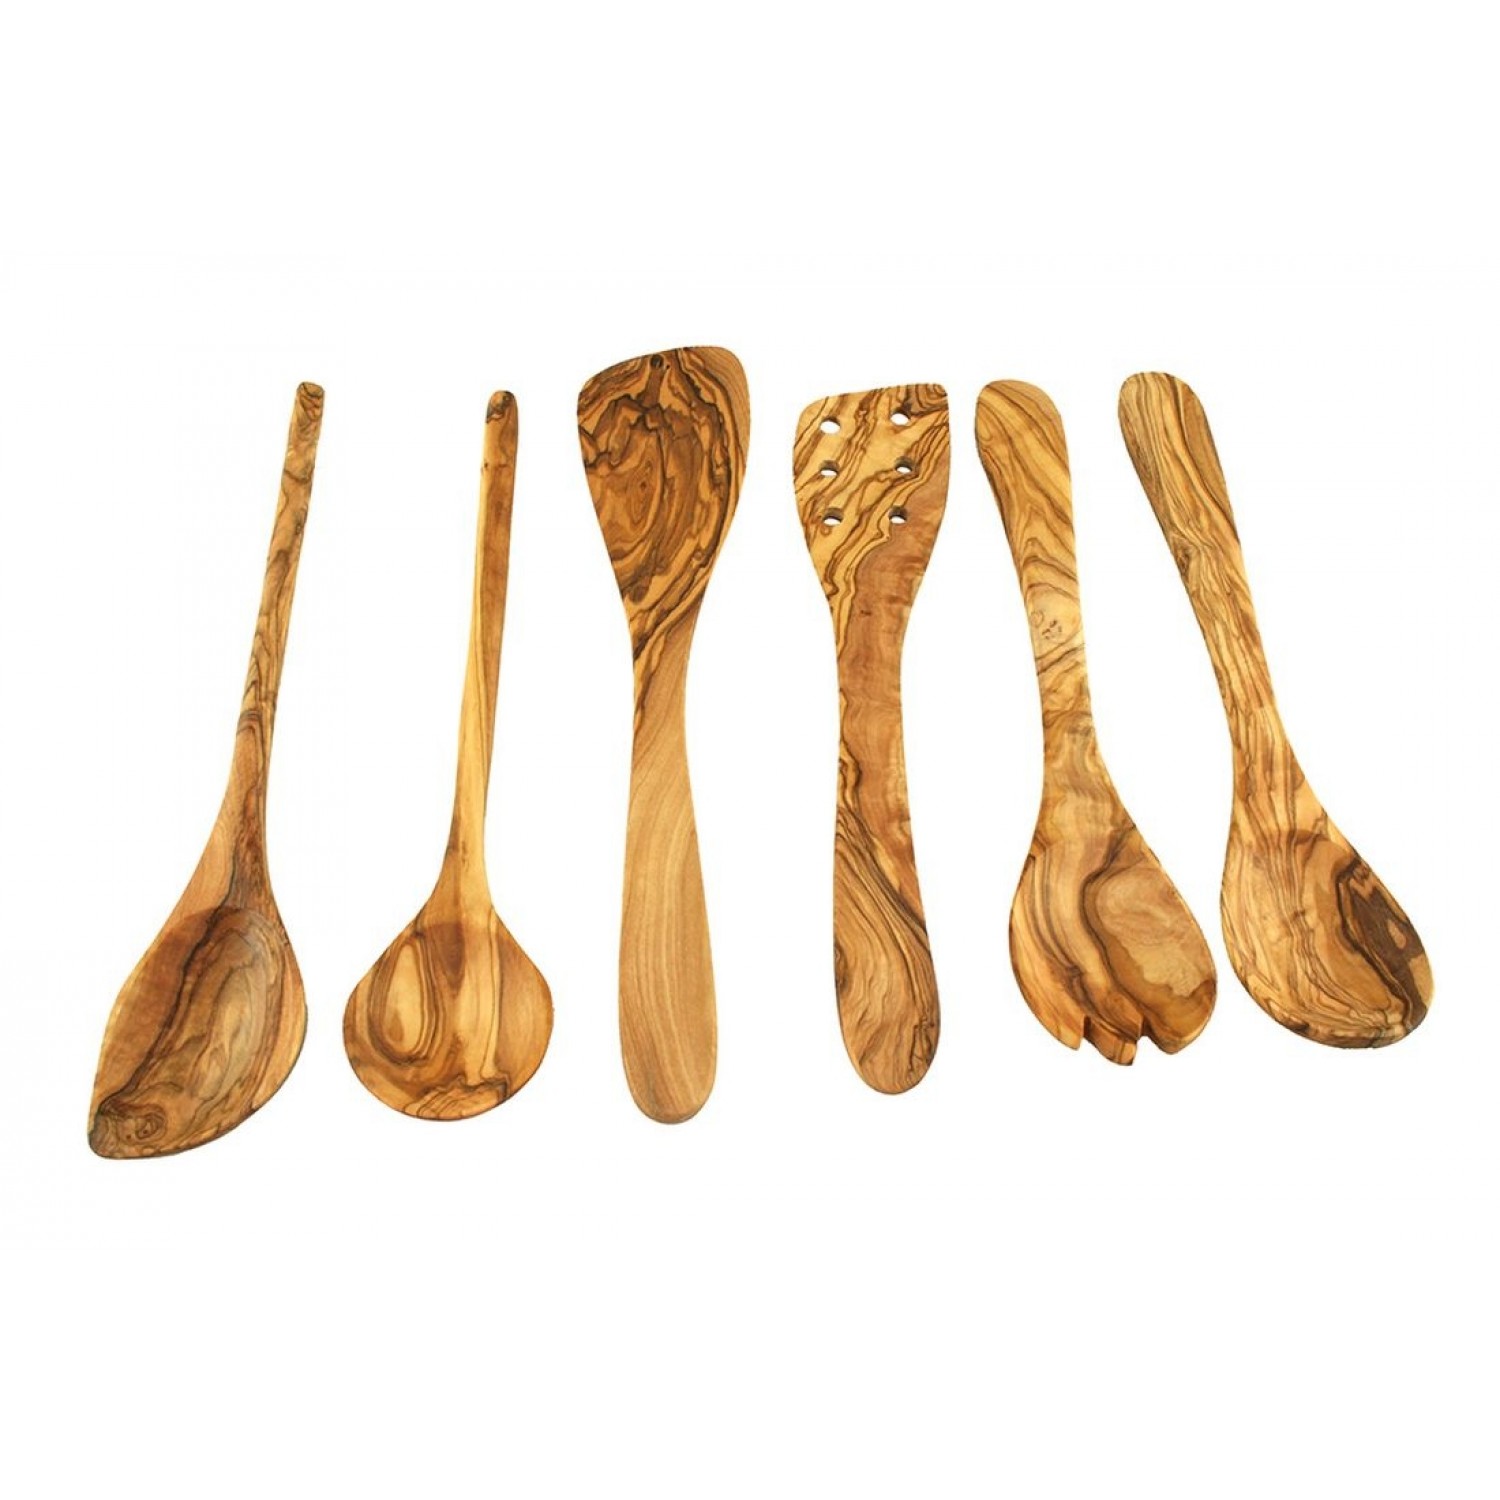 6-pieces sustainable Olive Wood Kitchen Set | D.O.M.